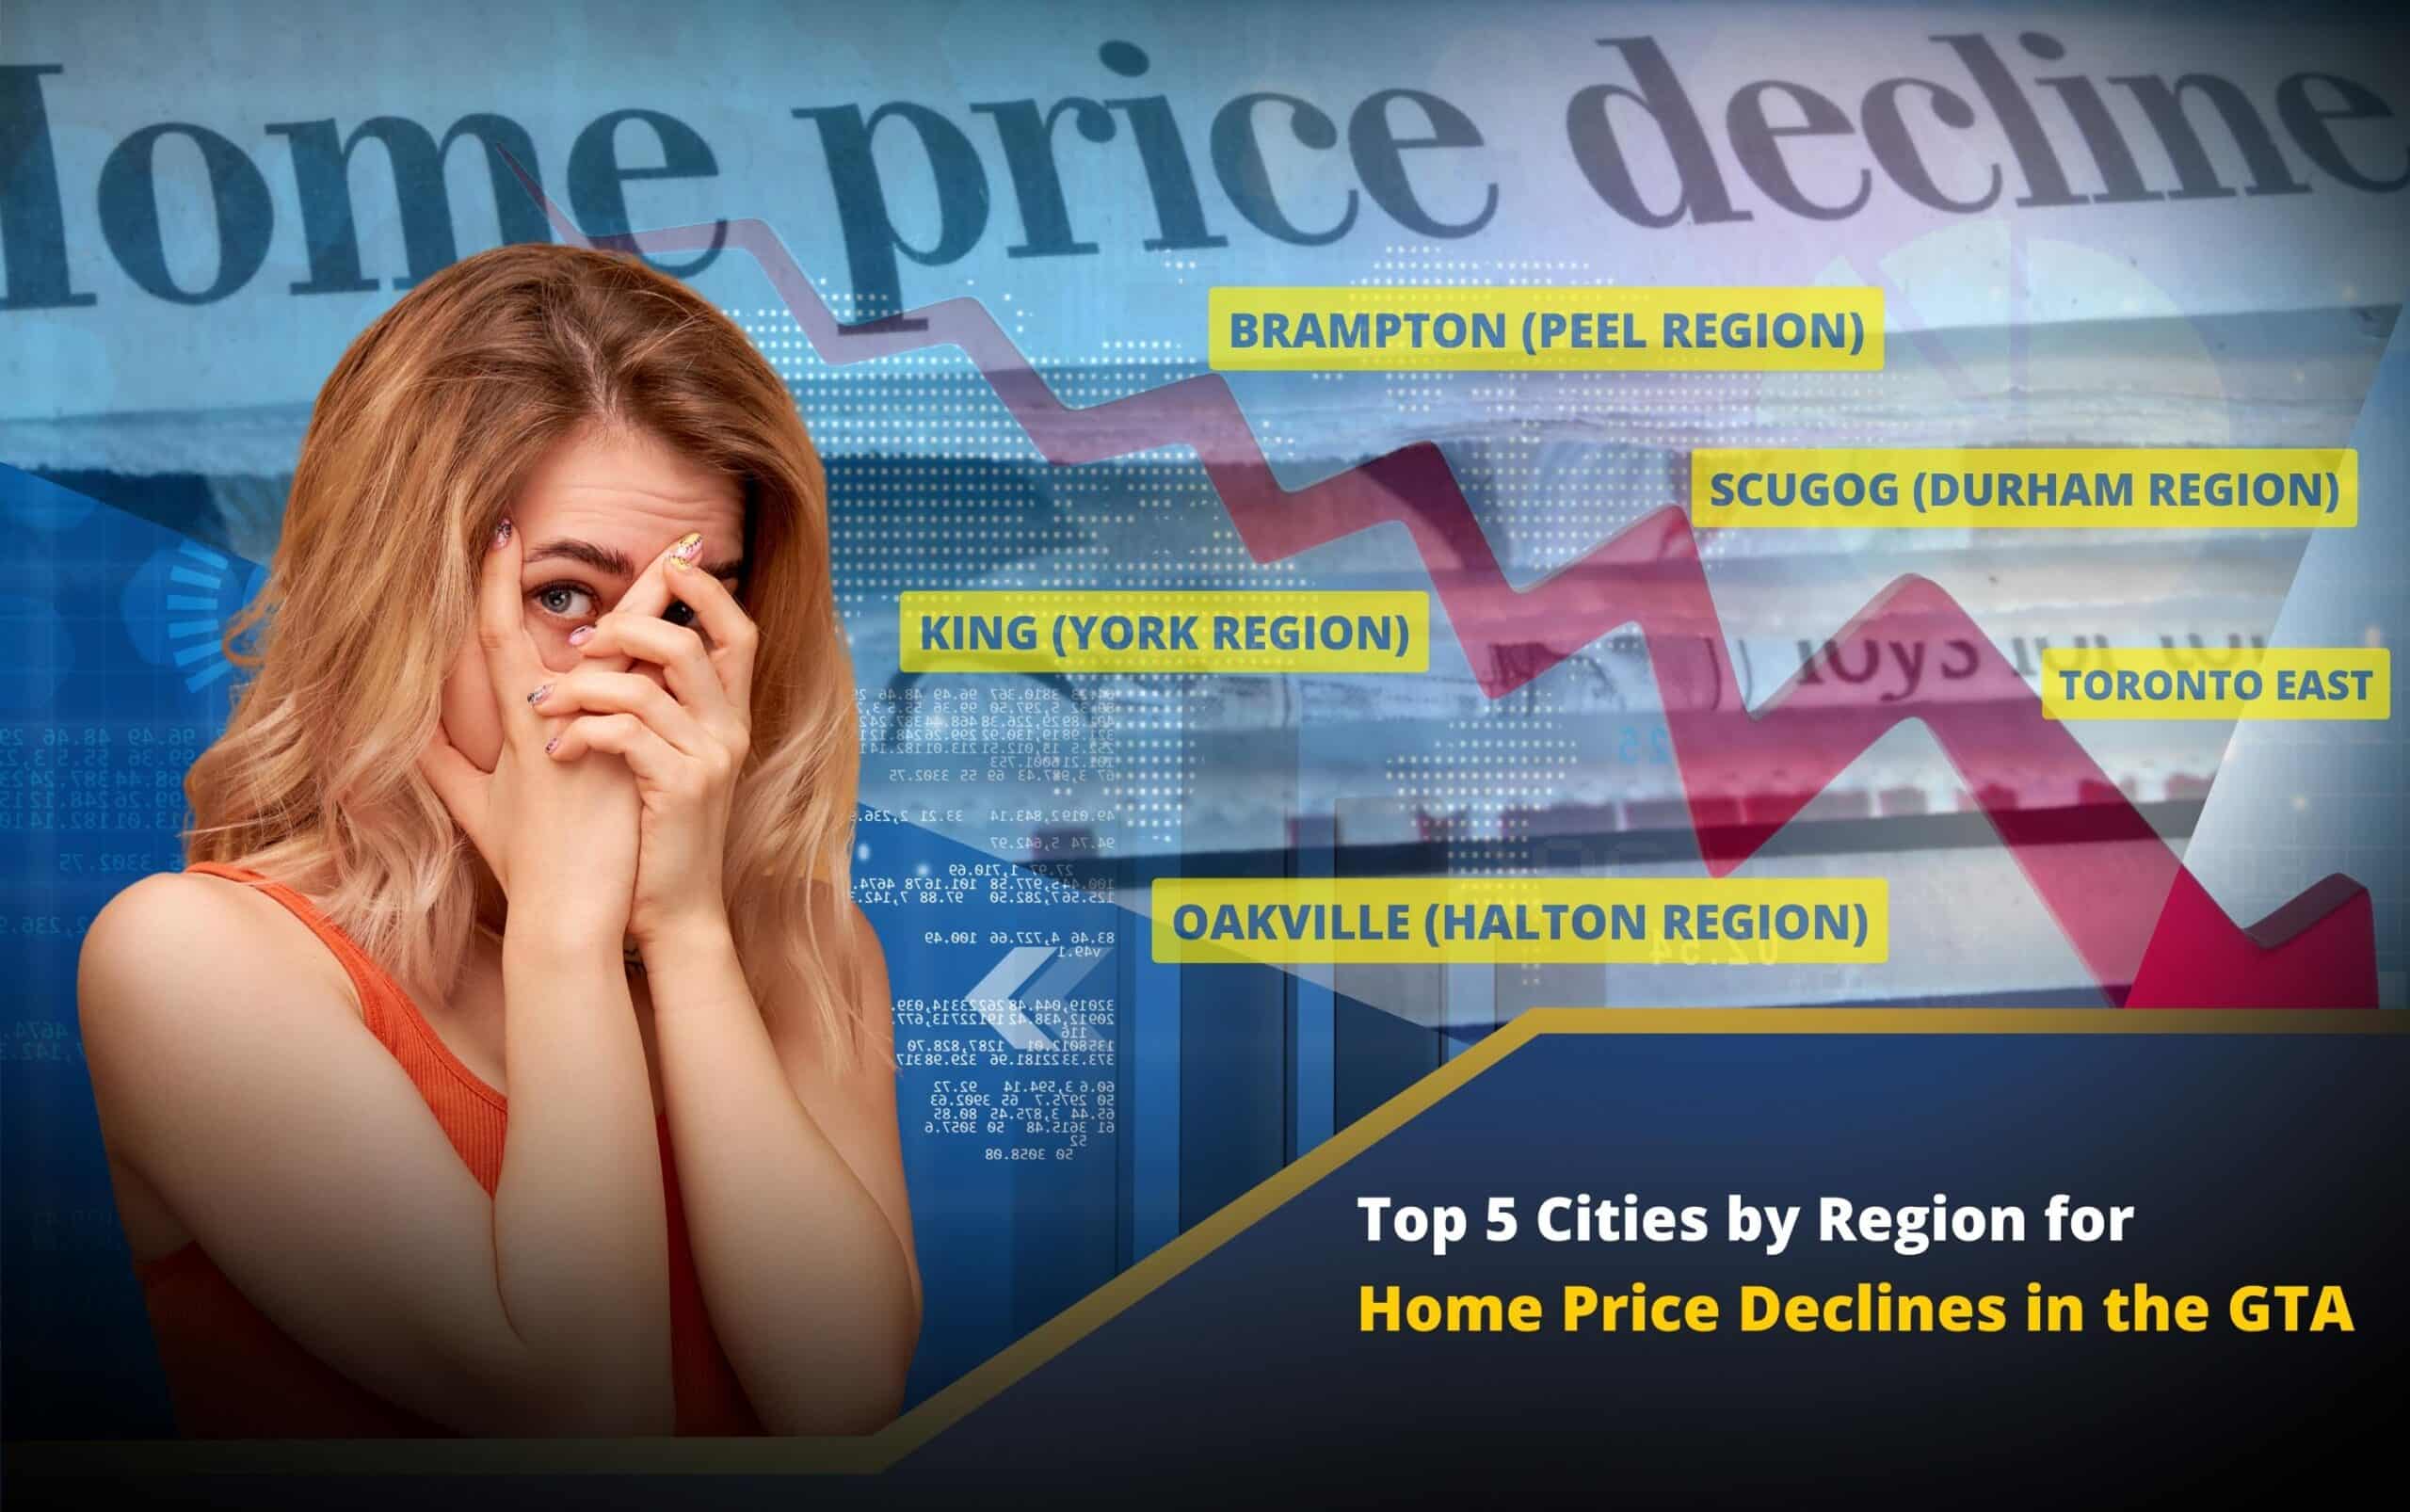 Top 5 Cities by Region for Home Price Declines in the GTA